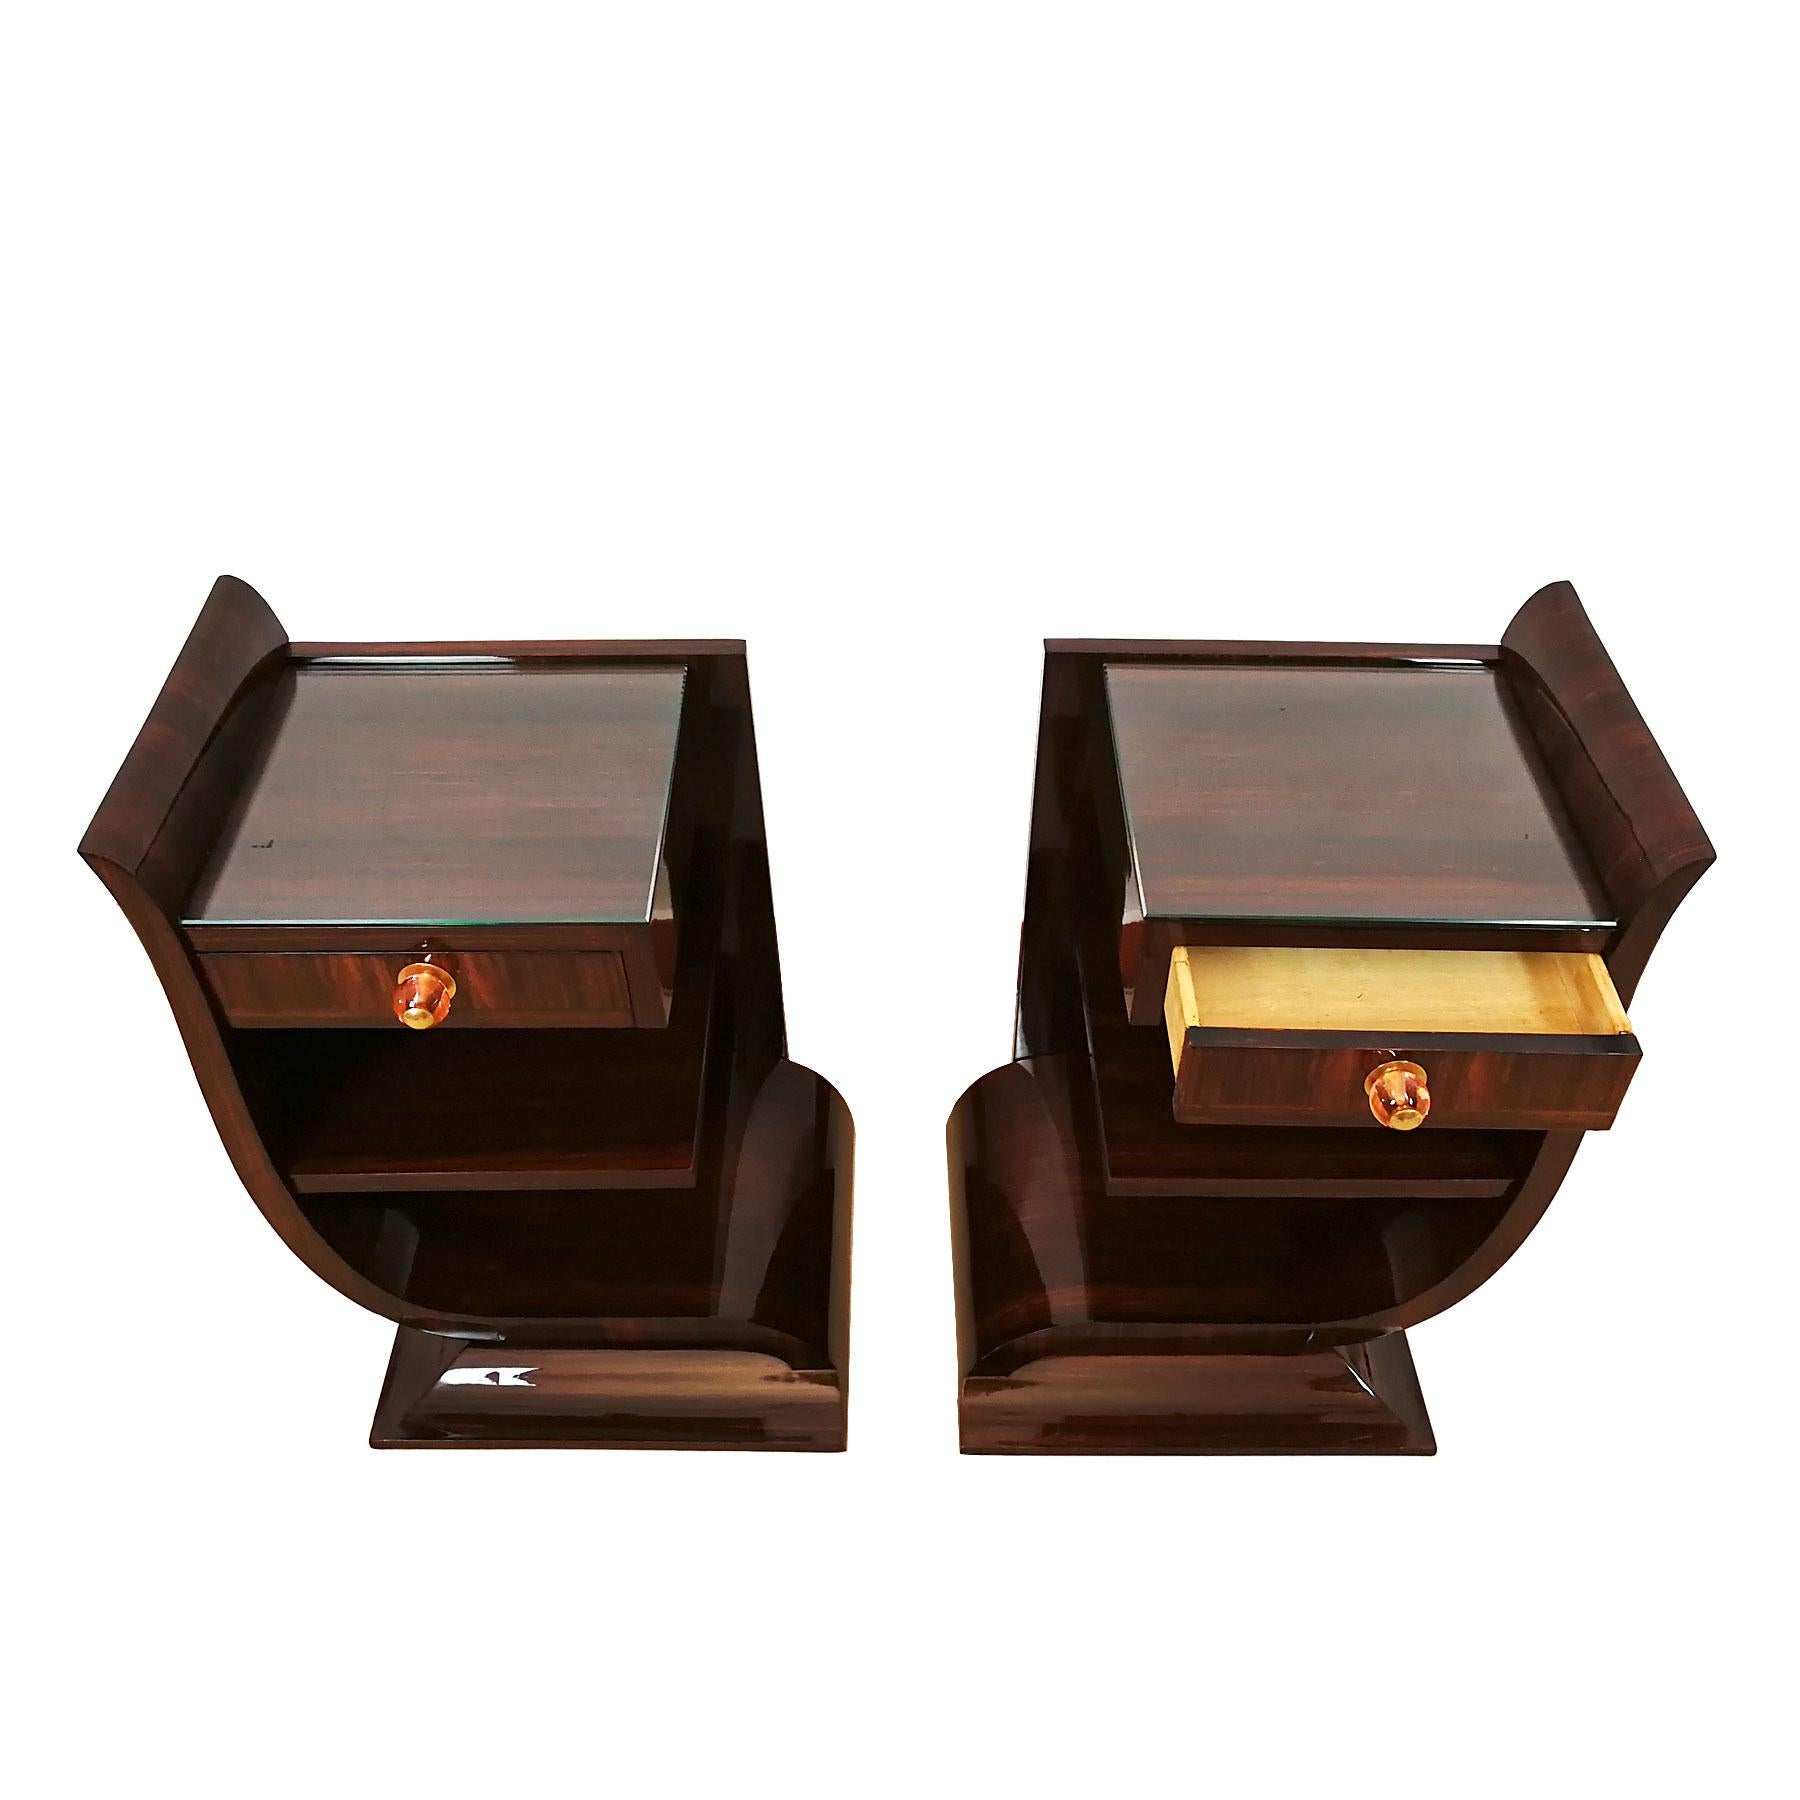 1930s Art Deco Asymmetrical and Rounded Nightstands, Mahogany, Glass, France 1